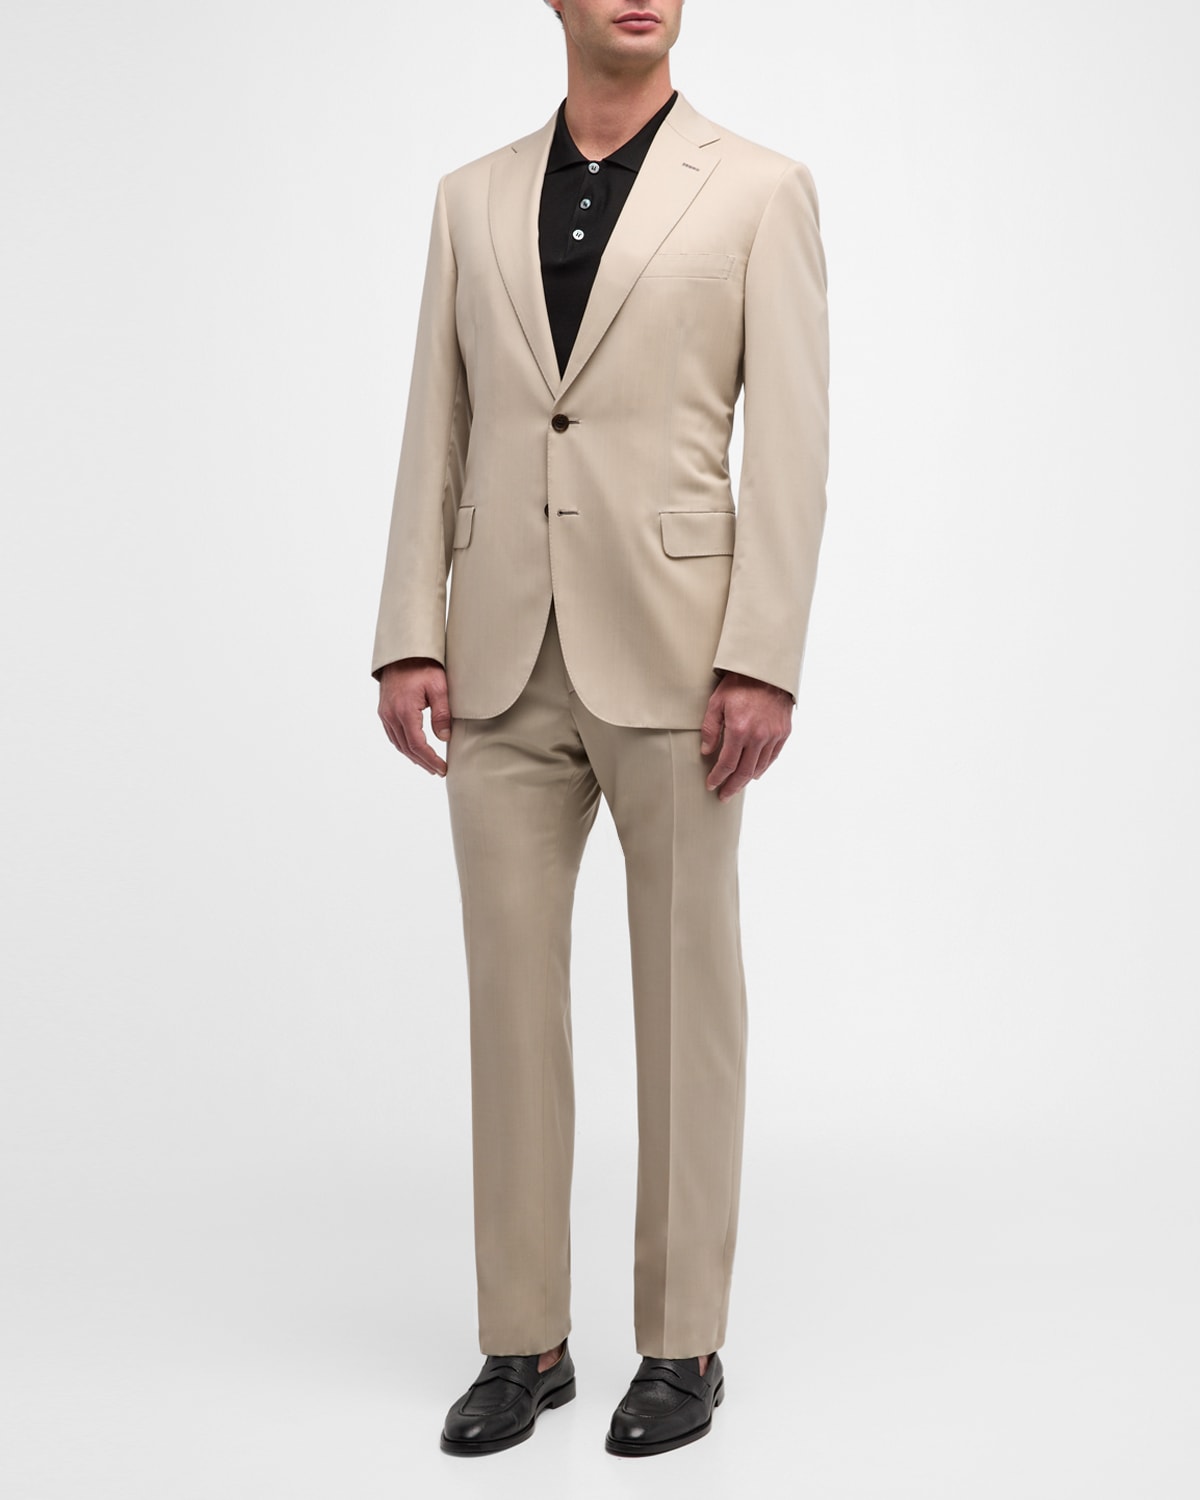 Brioni Men's Twill Wool Suit In Taupe